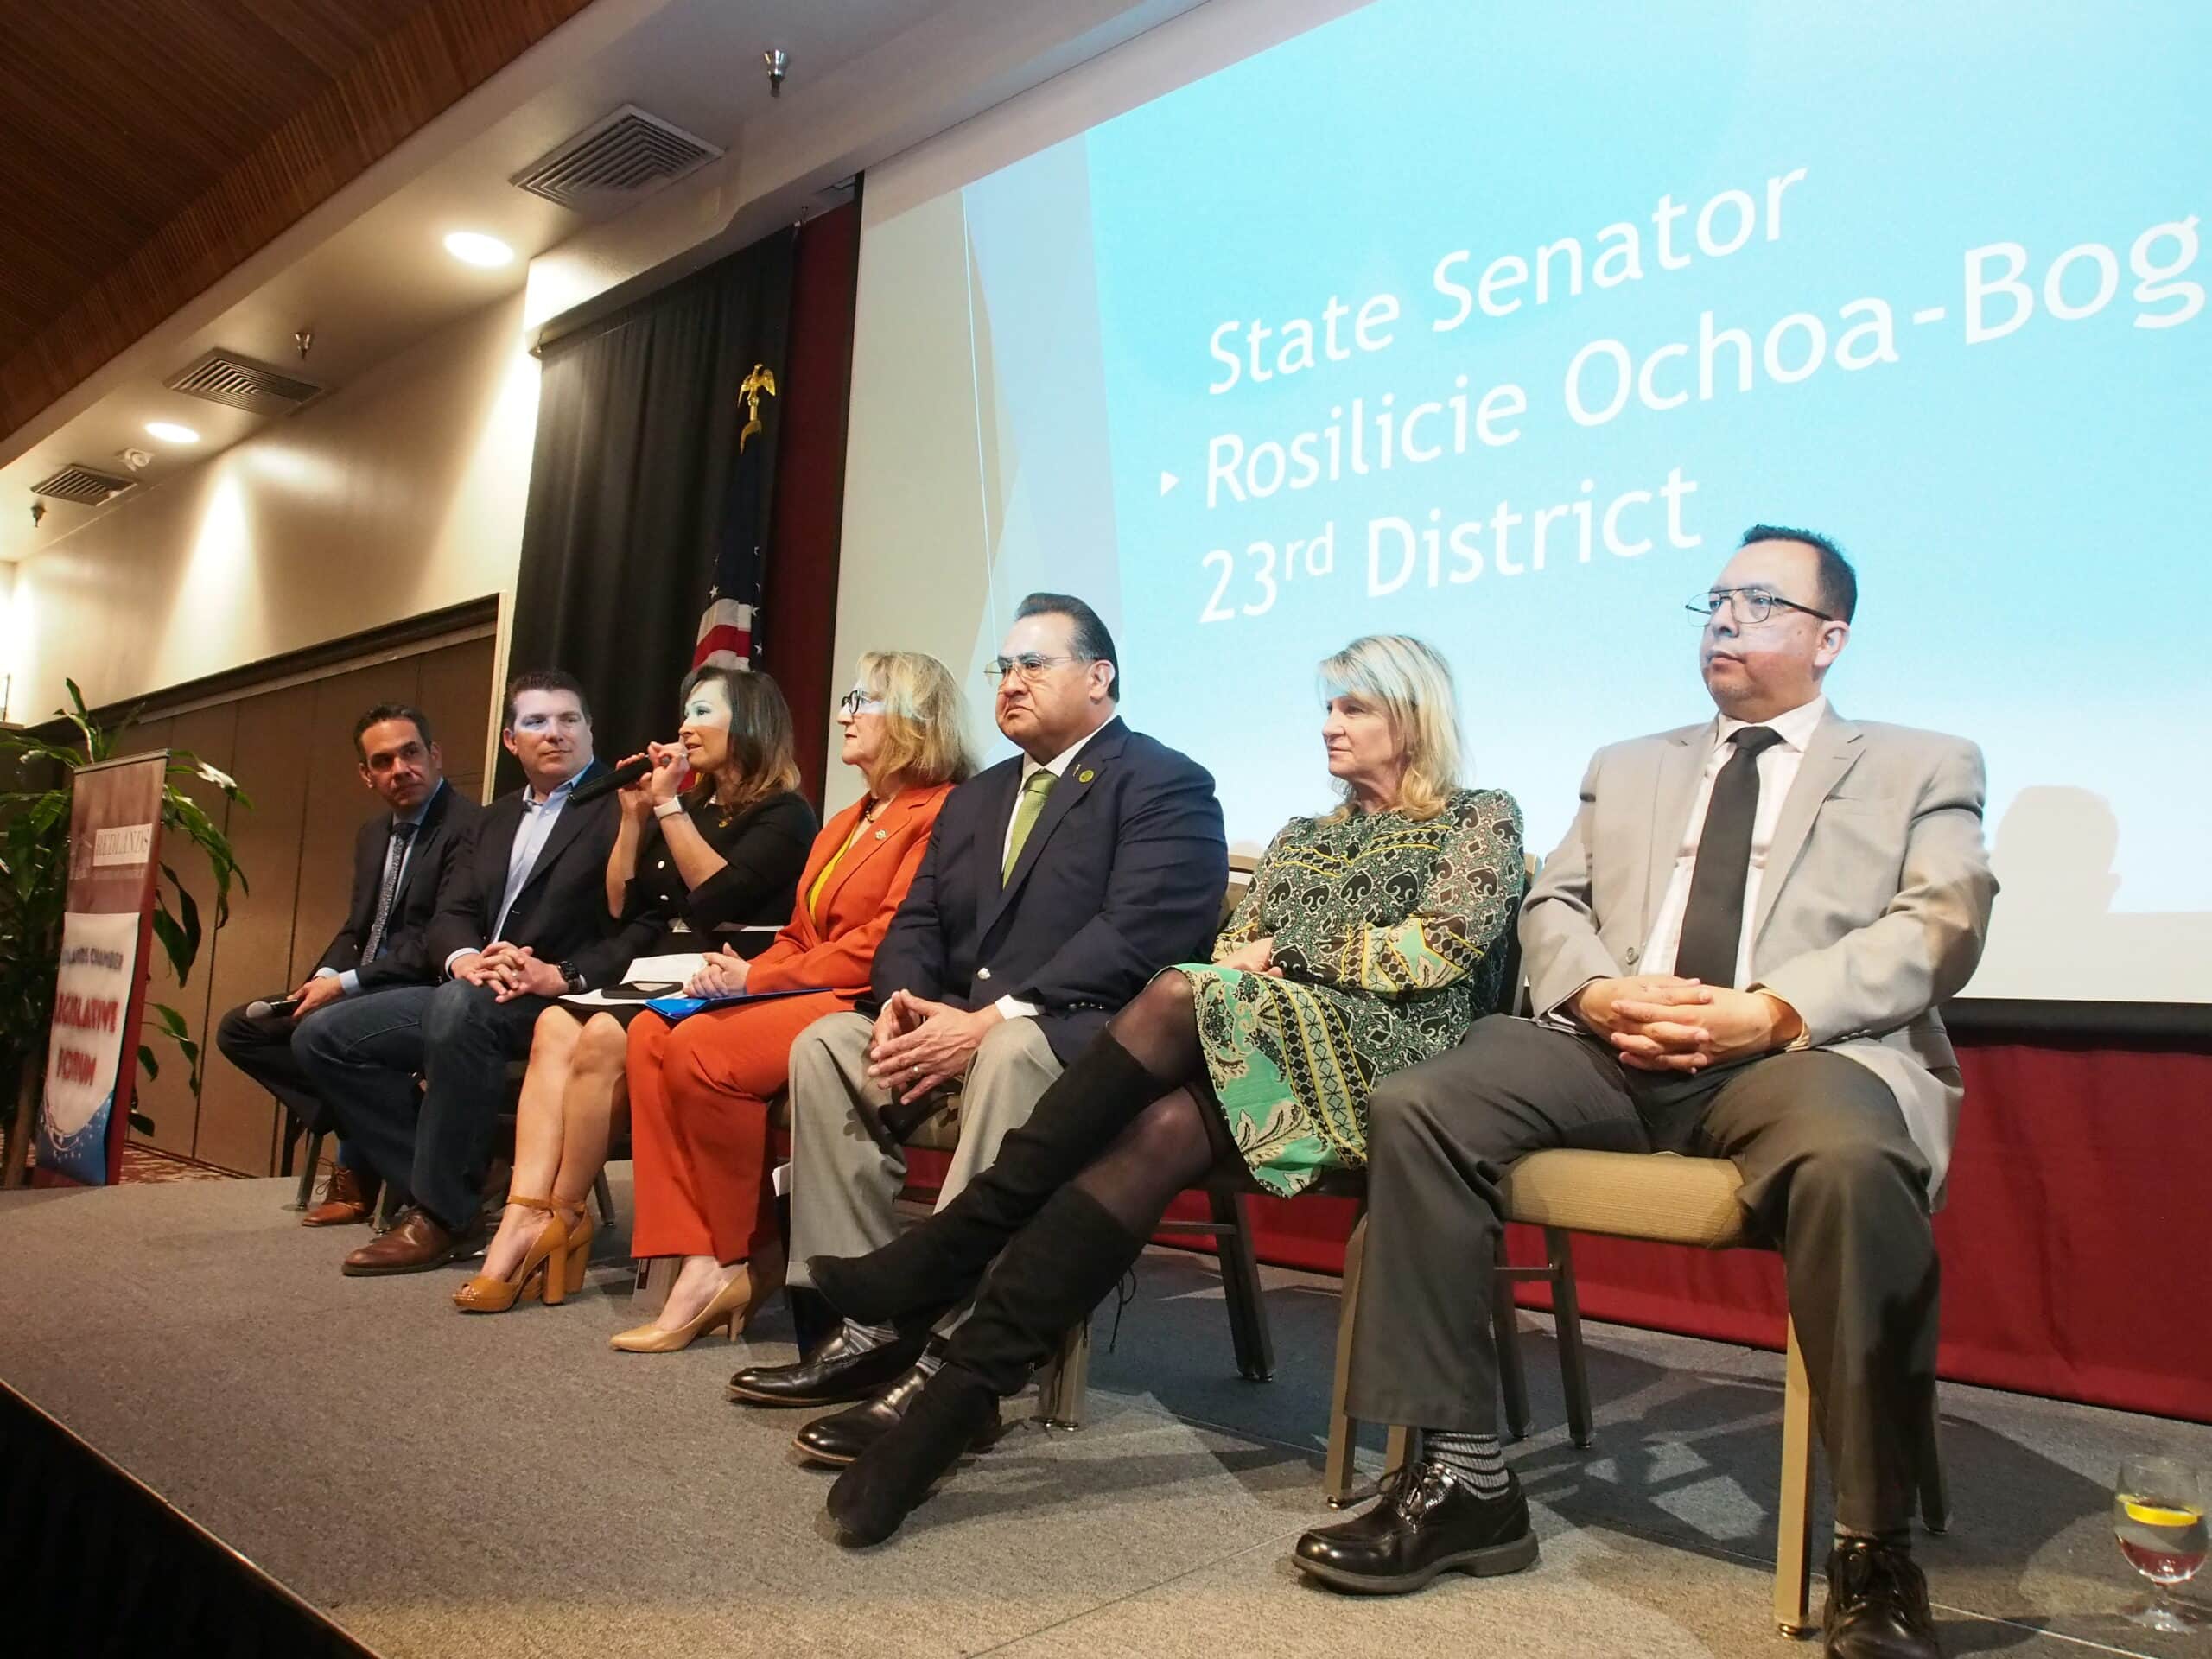 IE elected officials talk policy at bi-partisan forum